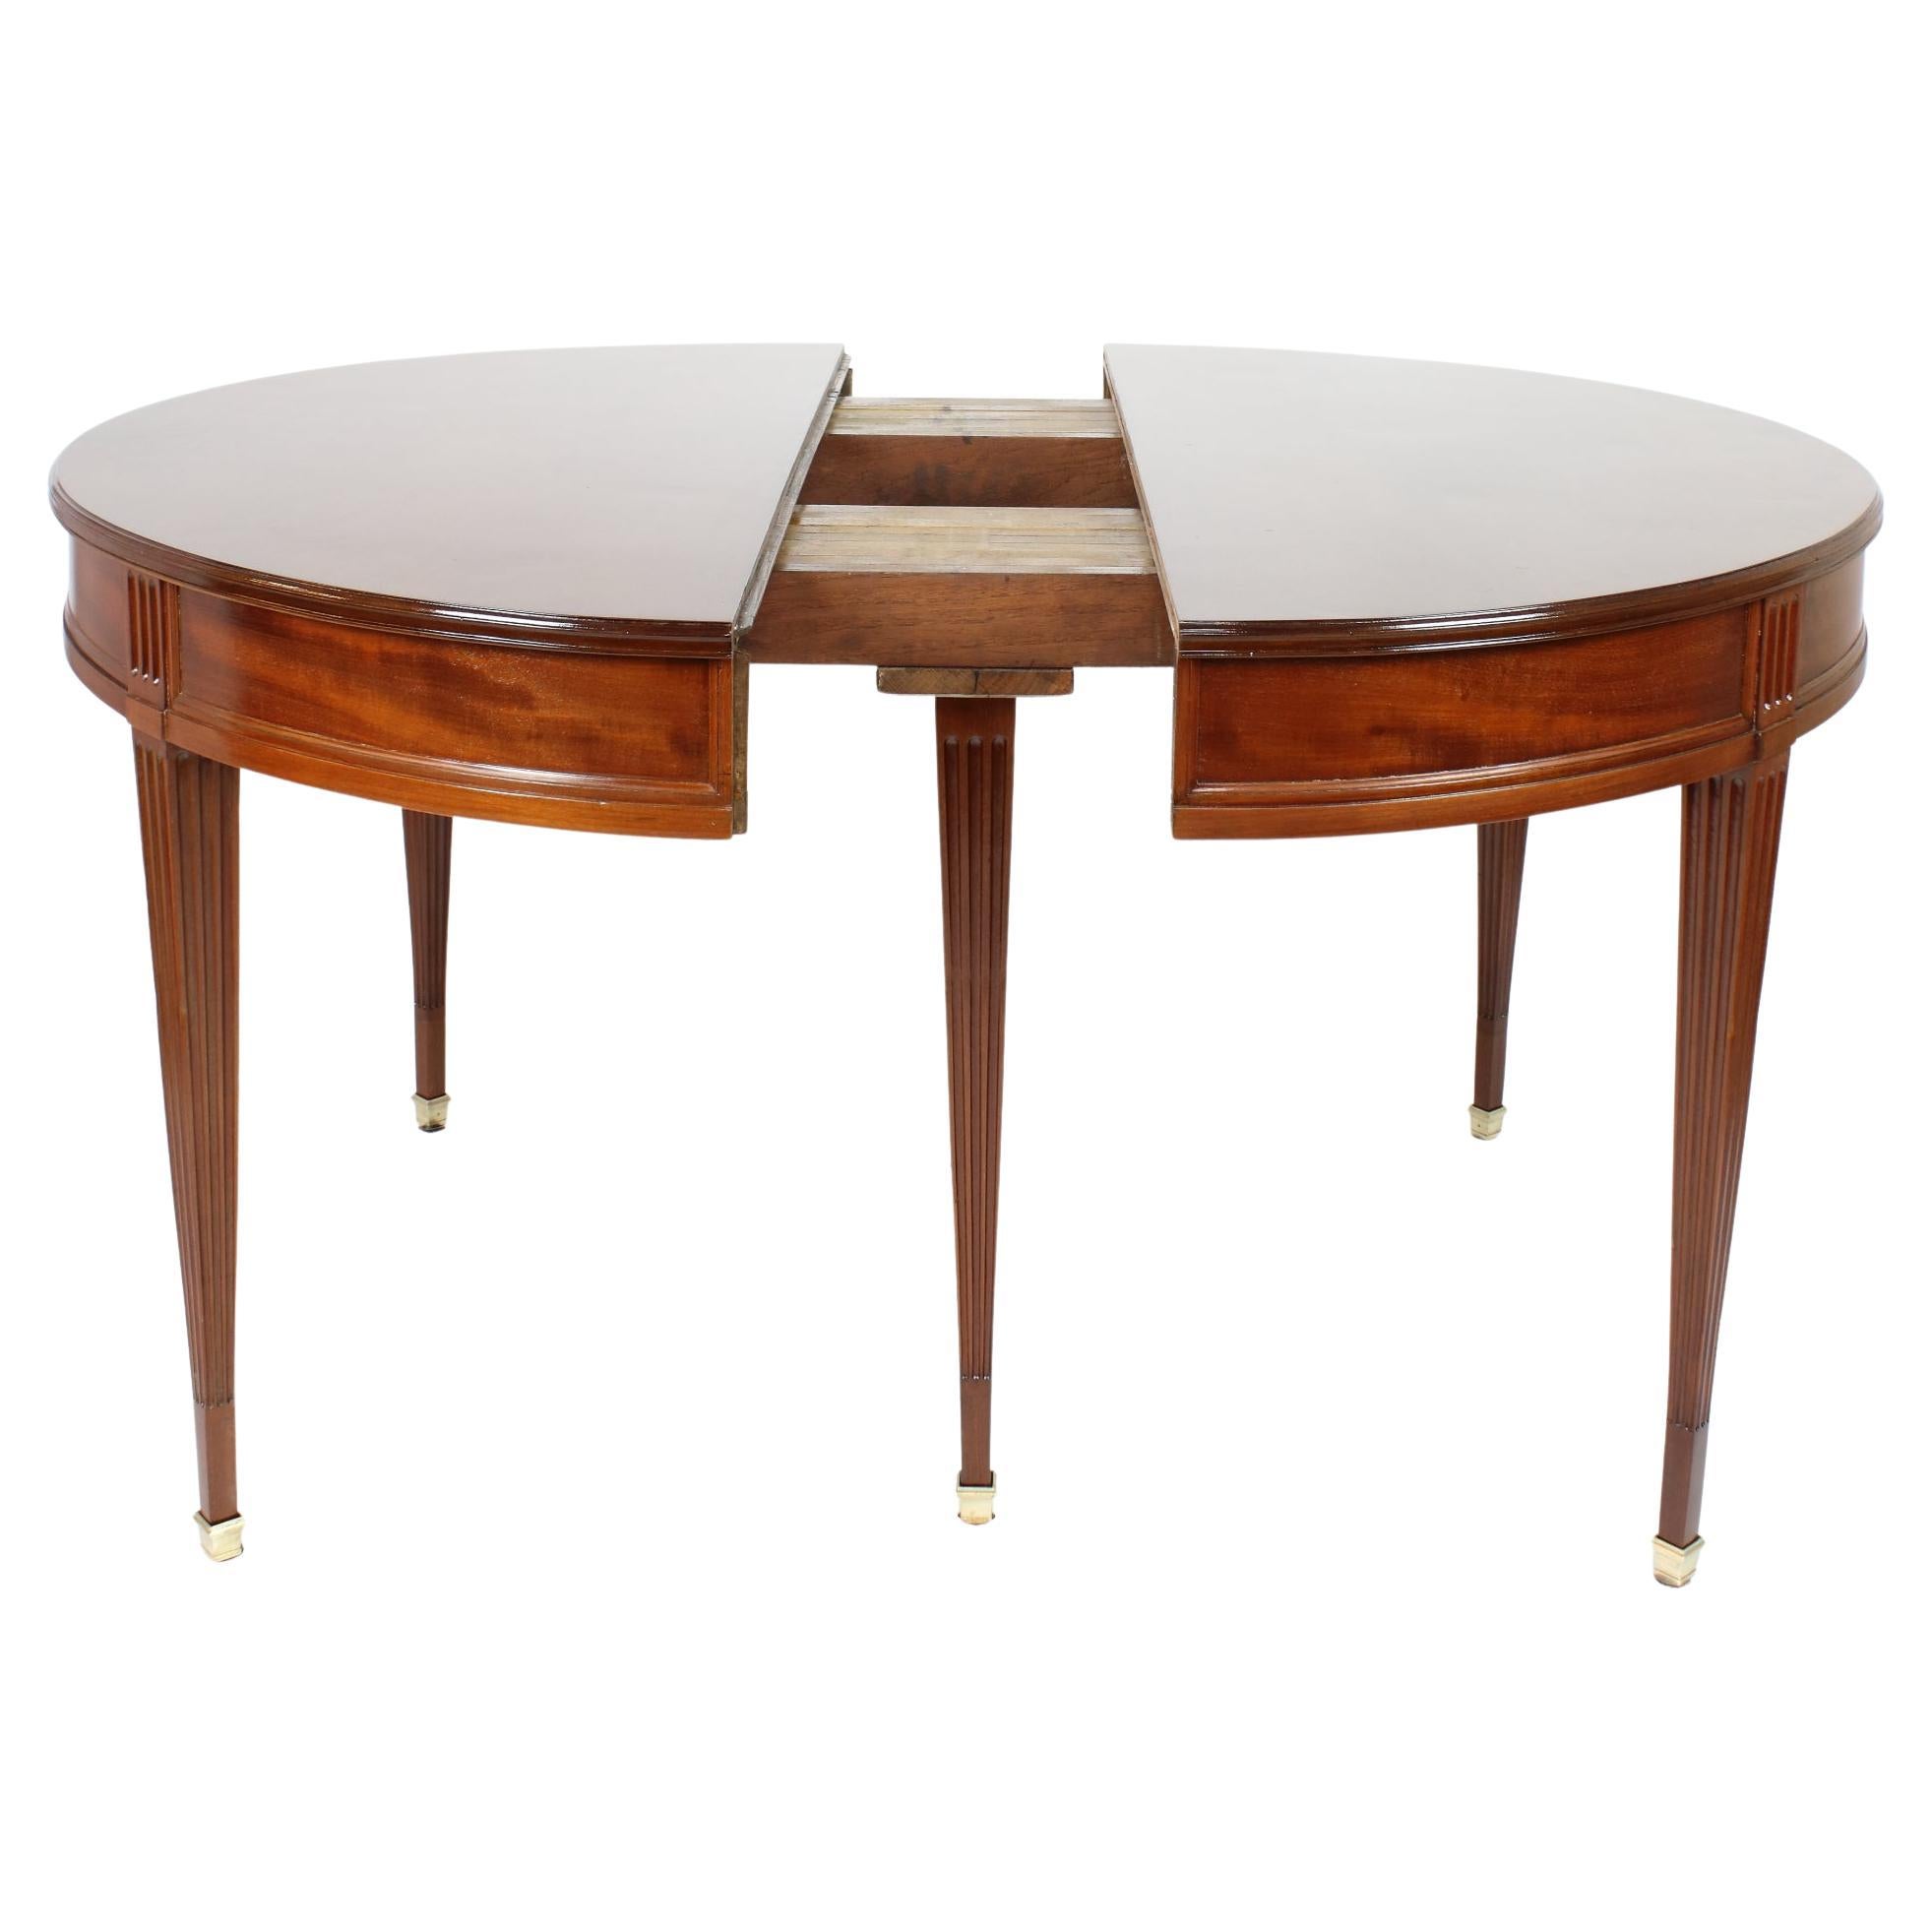 Late 18th Century Louis XVI Oval Extendable Dining Table For Sale